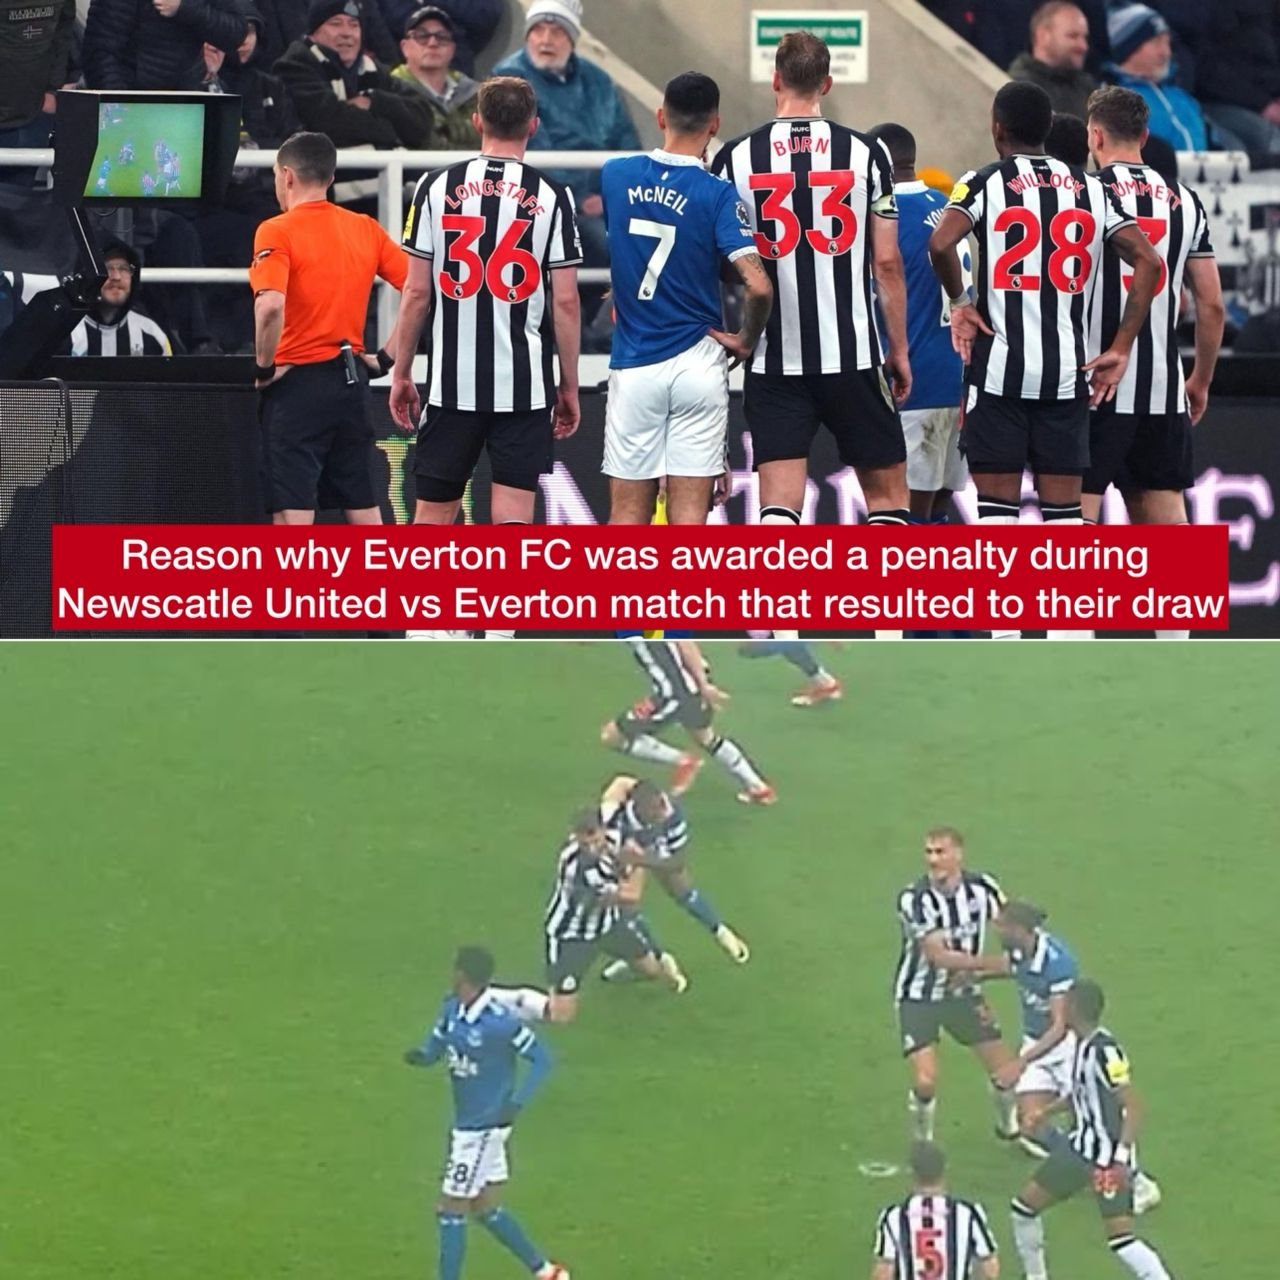 Reason why Everton FC was given a penalty during Newscatle United vs Everton match that resulted to their draw